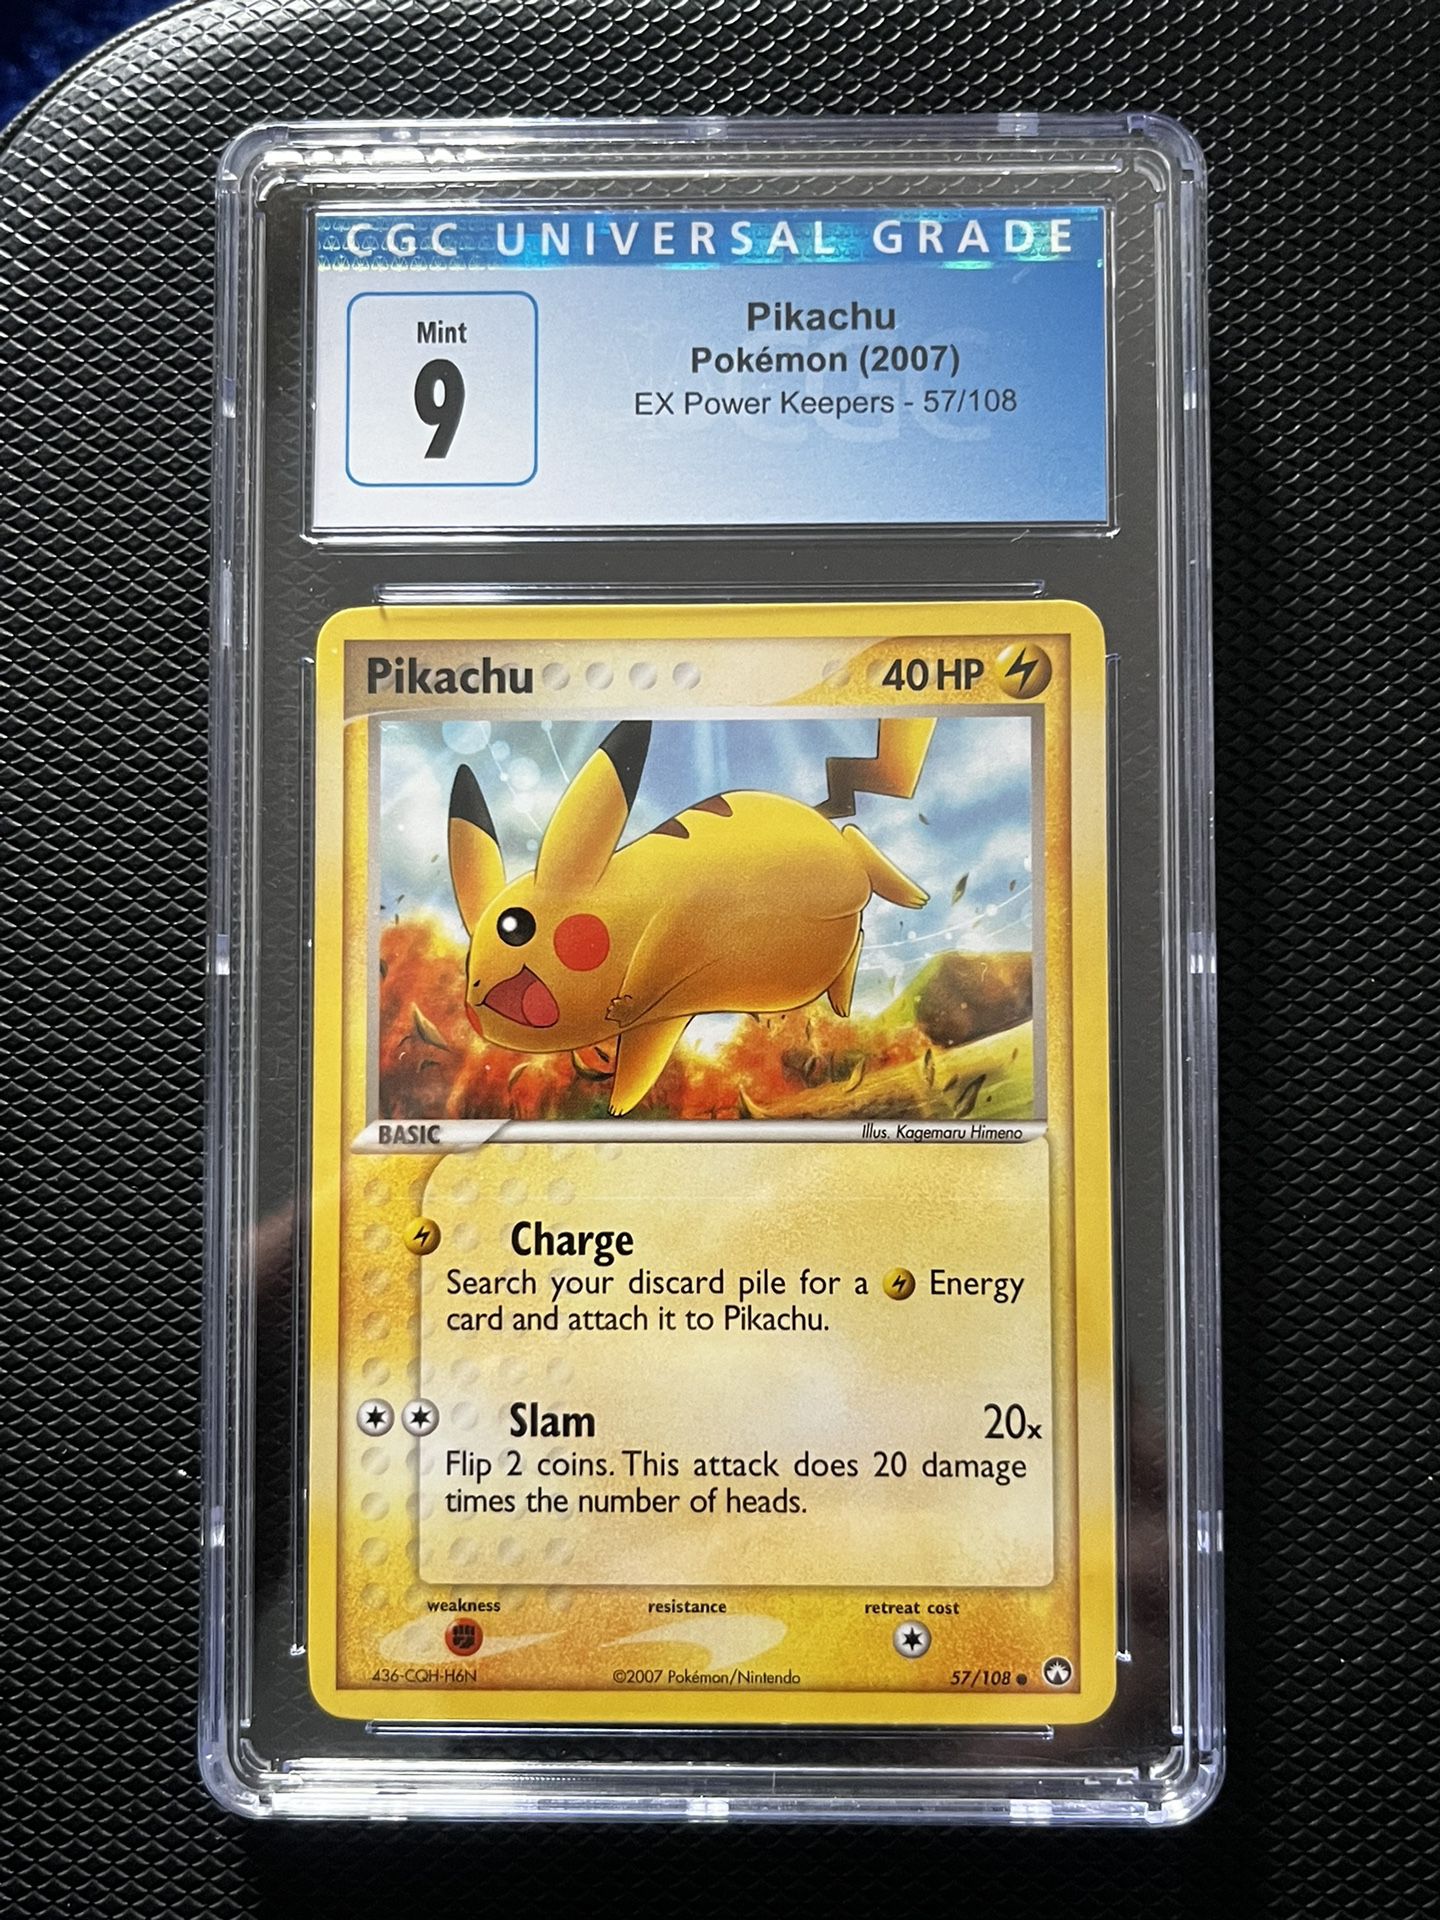 CGC 9 Pikachu From 2007 Ex Power Keepers Set